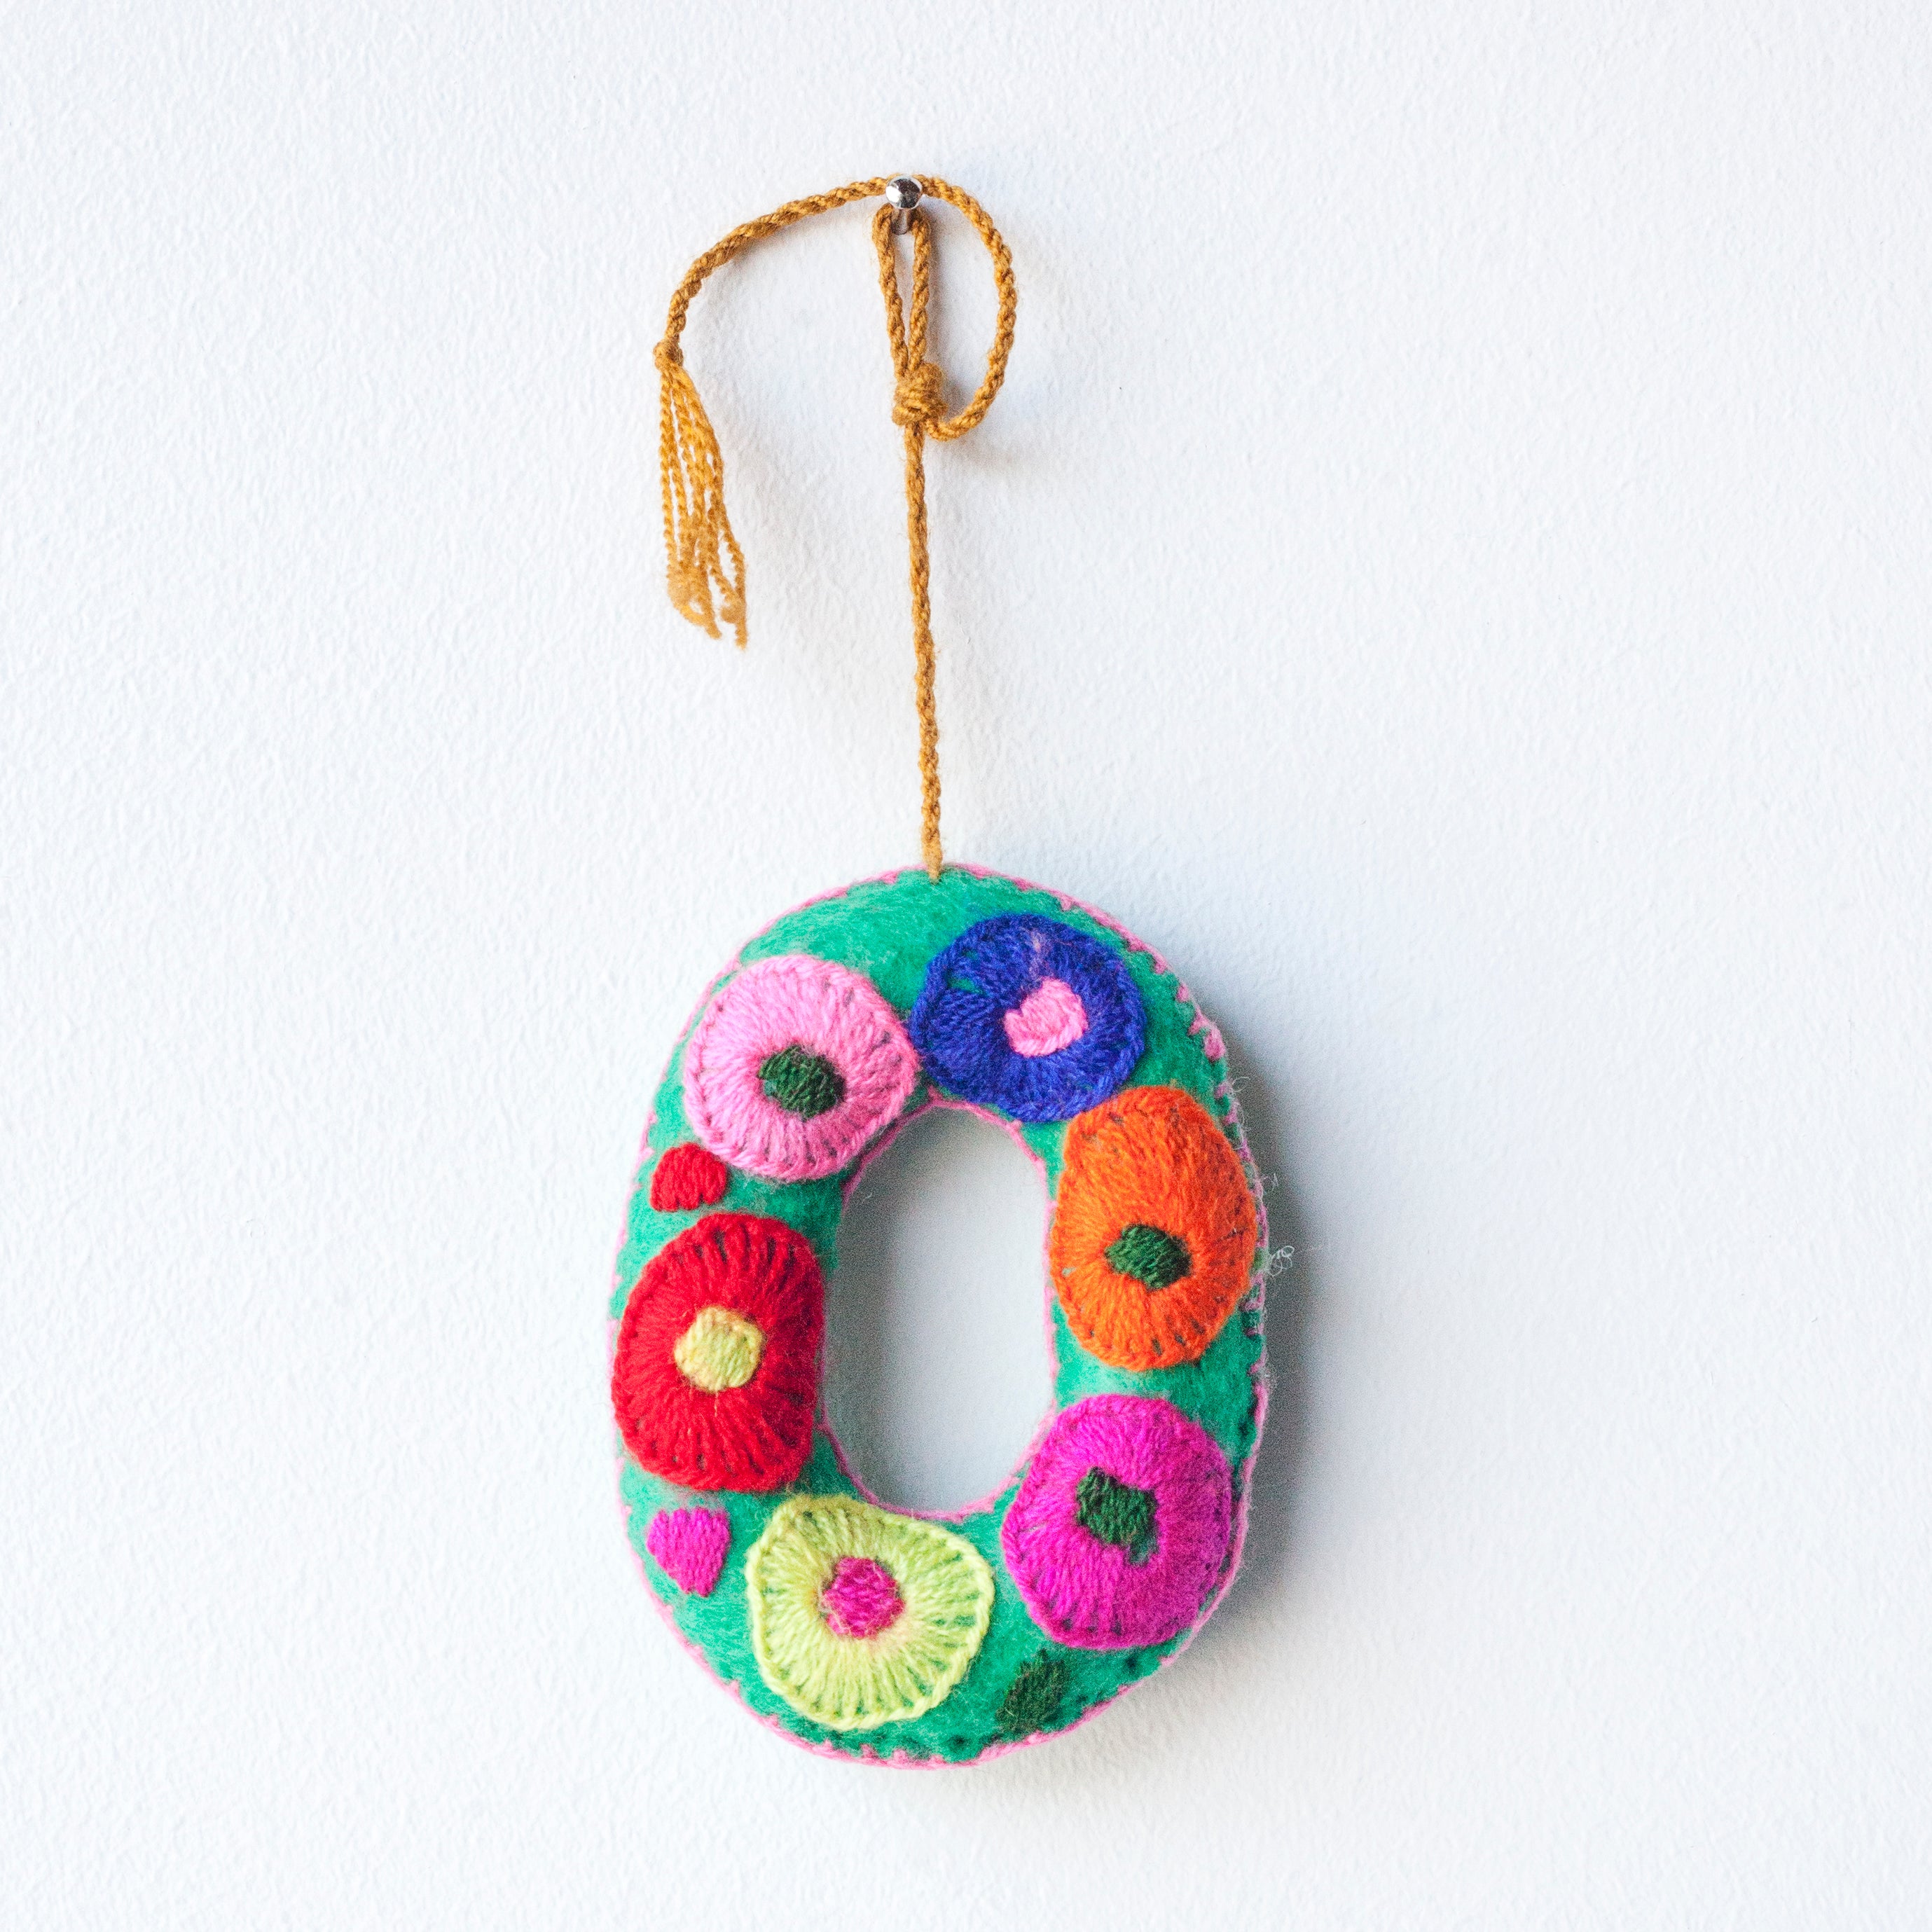 Colorful felt letter "O" with multicolor floral hand-embroidery hanging by a colorful string.